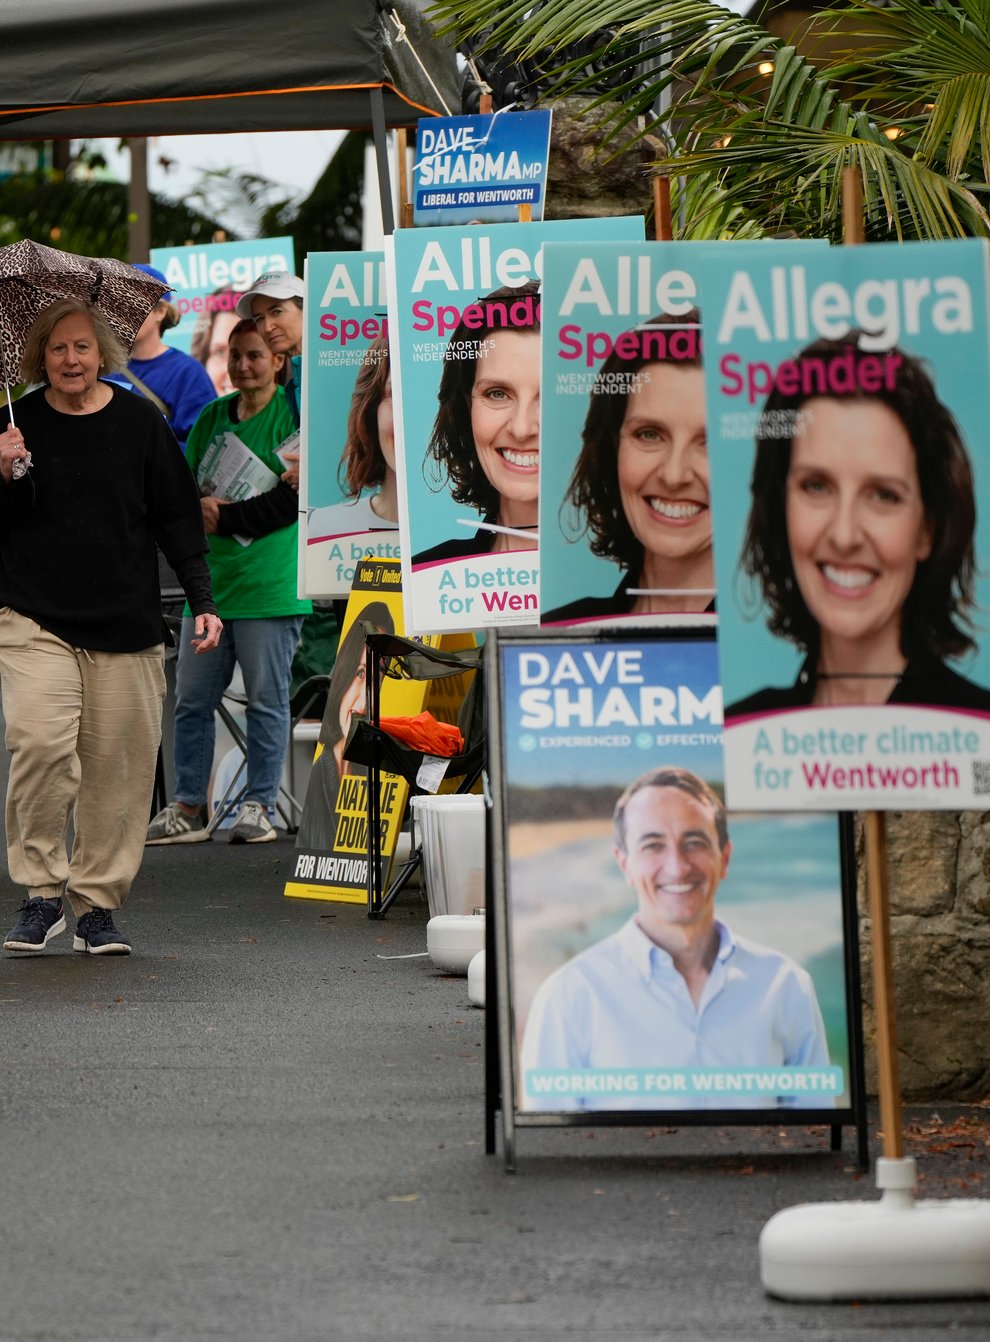 A woman walks past billboards for candidates outside a polling station in Sydney (AP)